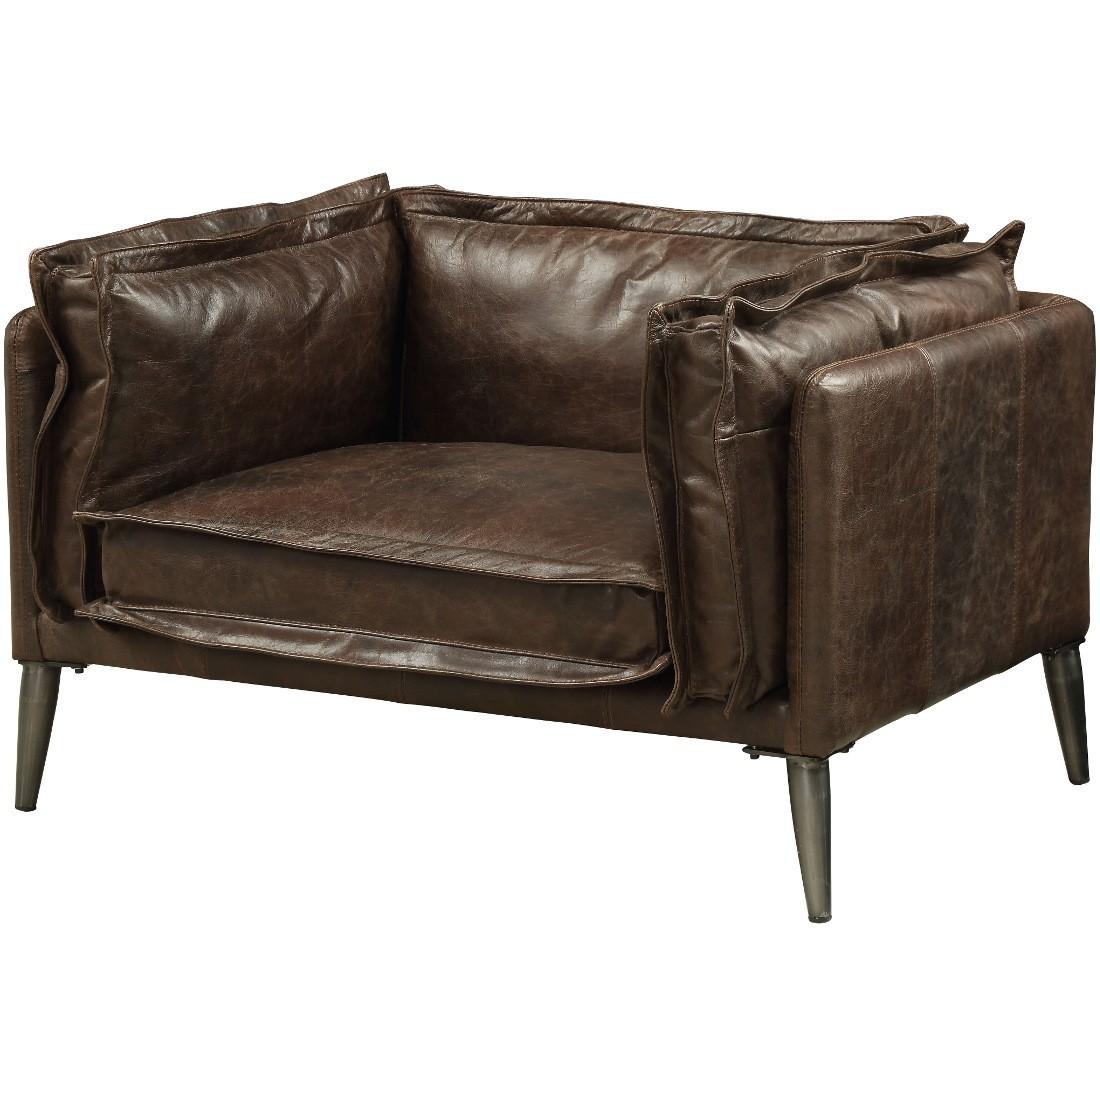 Contemporary Oversized Chair Porchester-52482 Porchester-52482 in Chocolate Top grain leather